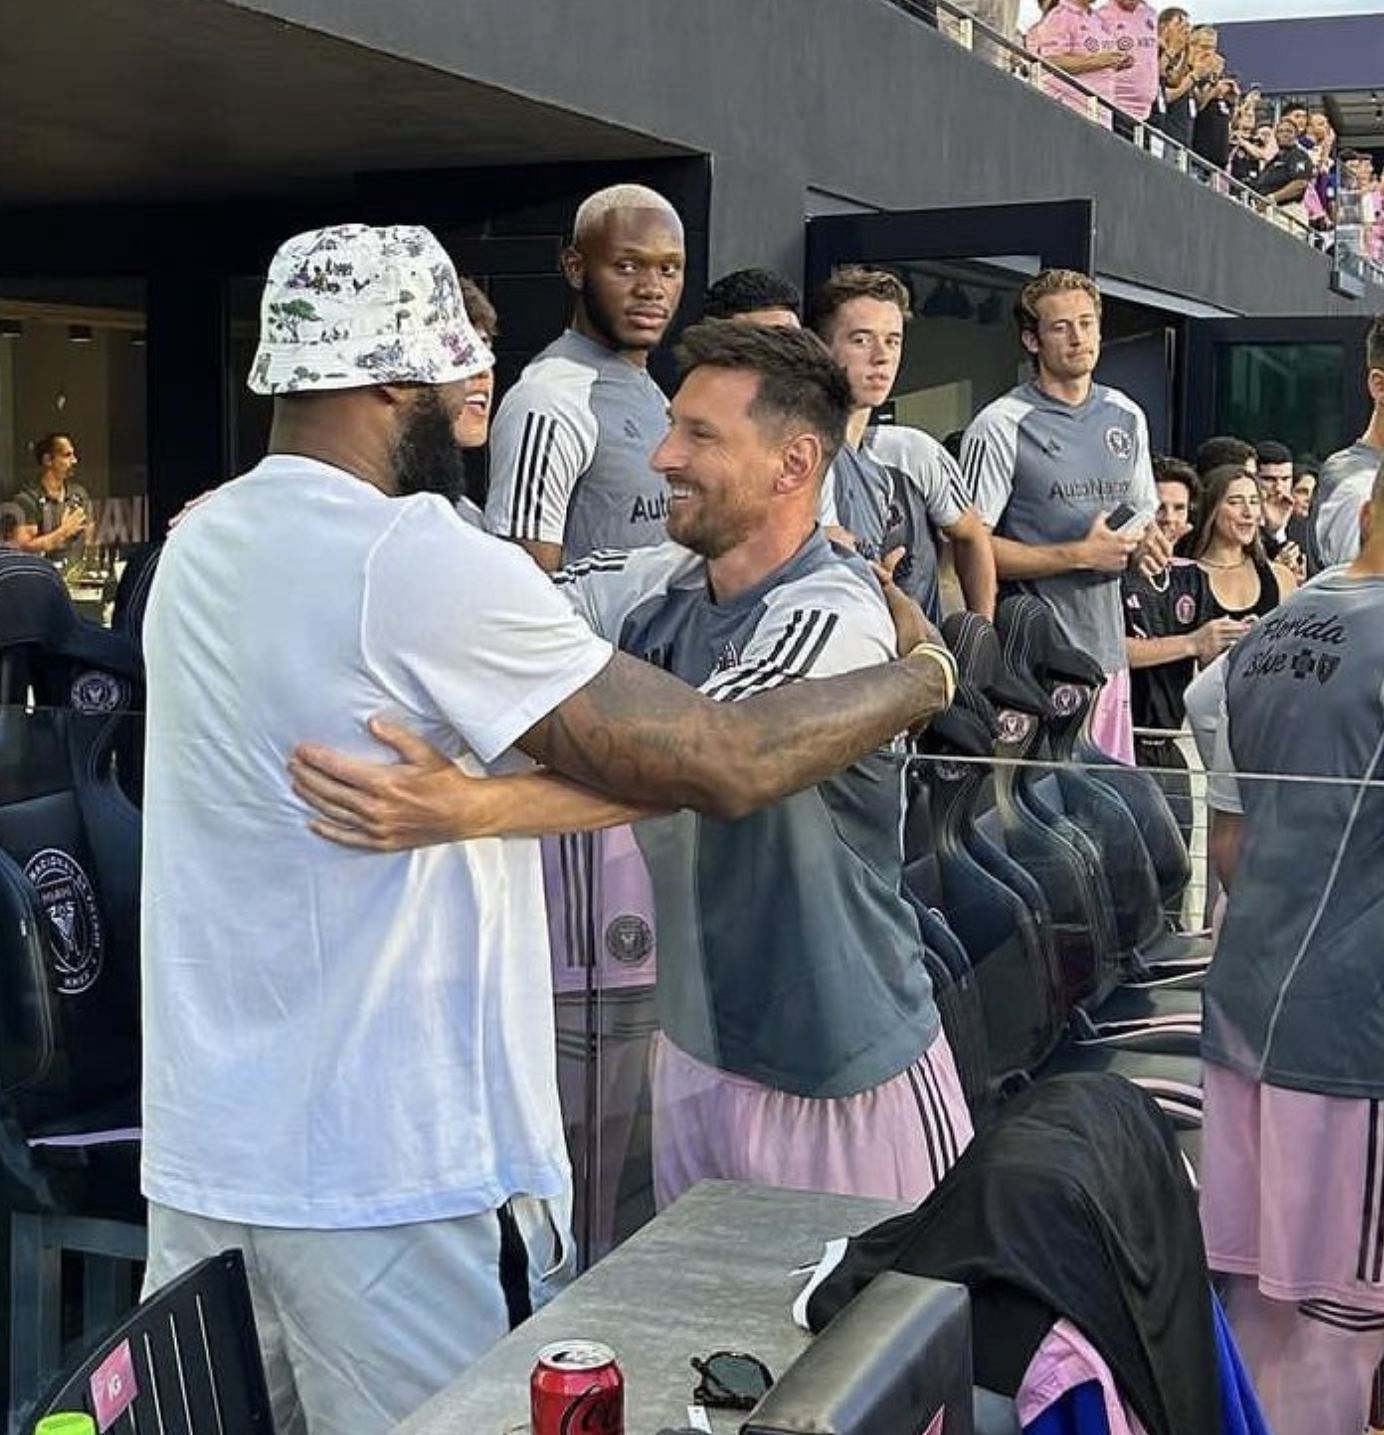 LeBron greets Leo Messi before the game